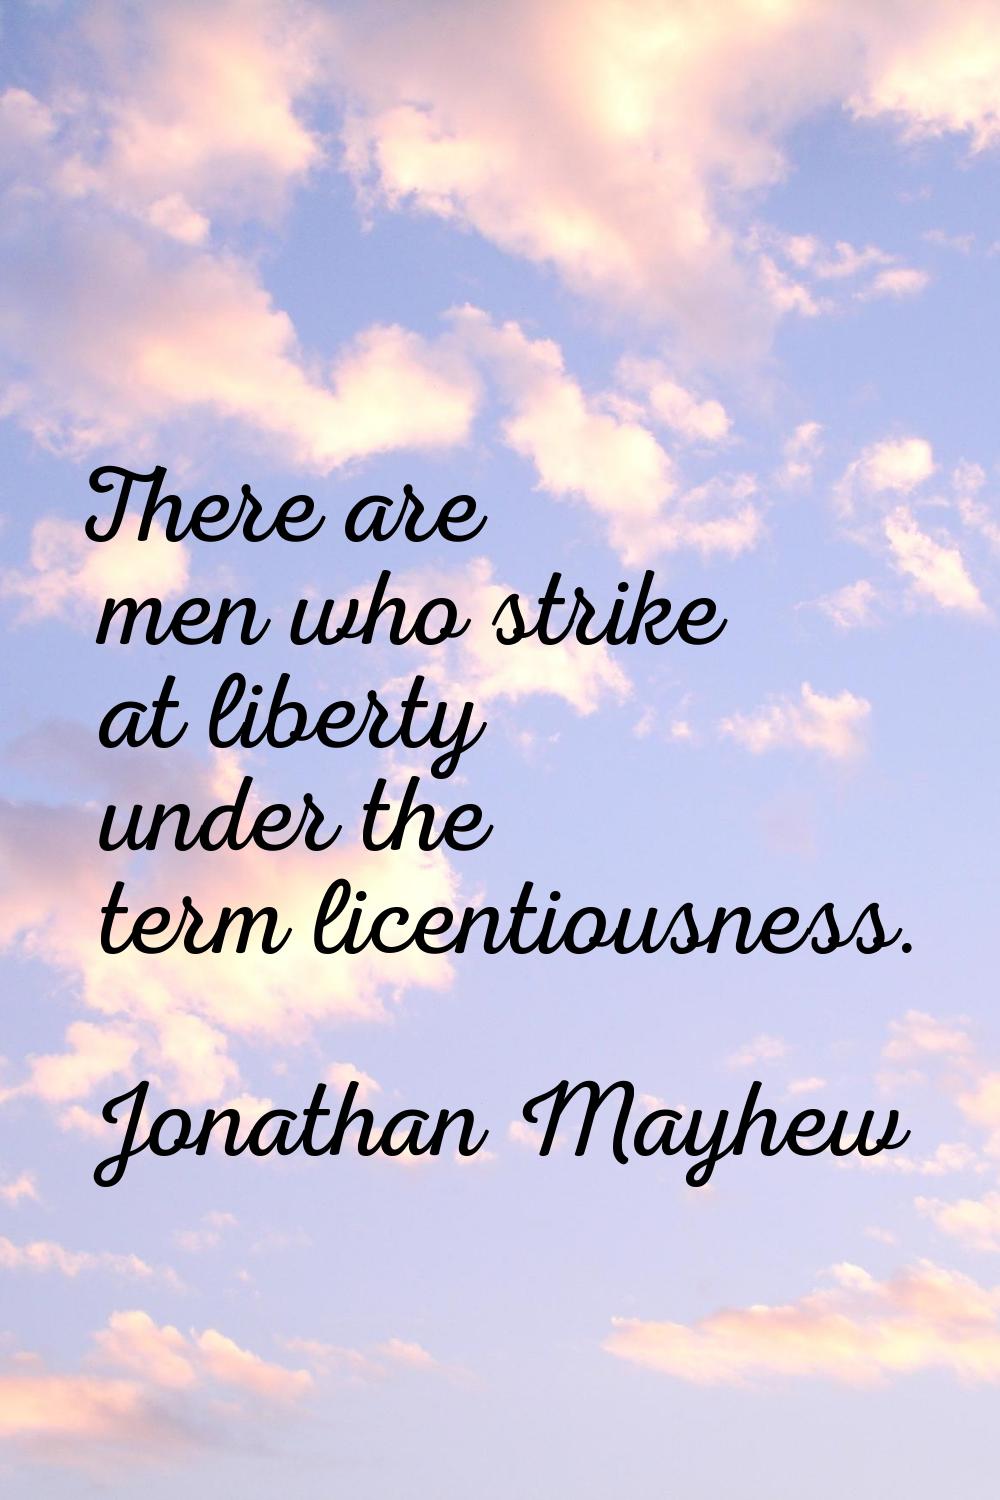 There are men who strike at liberty under the term licentiousness.